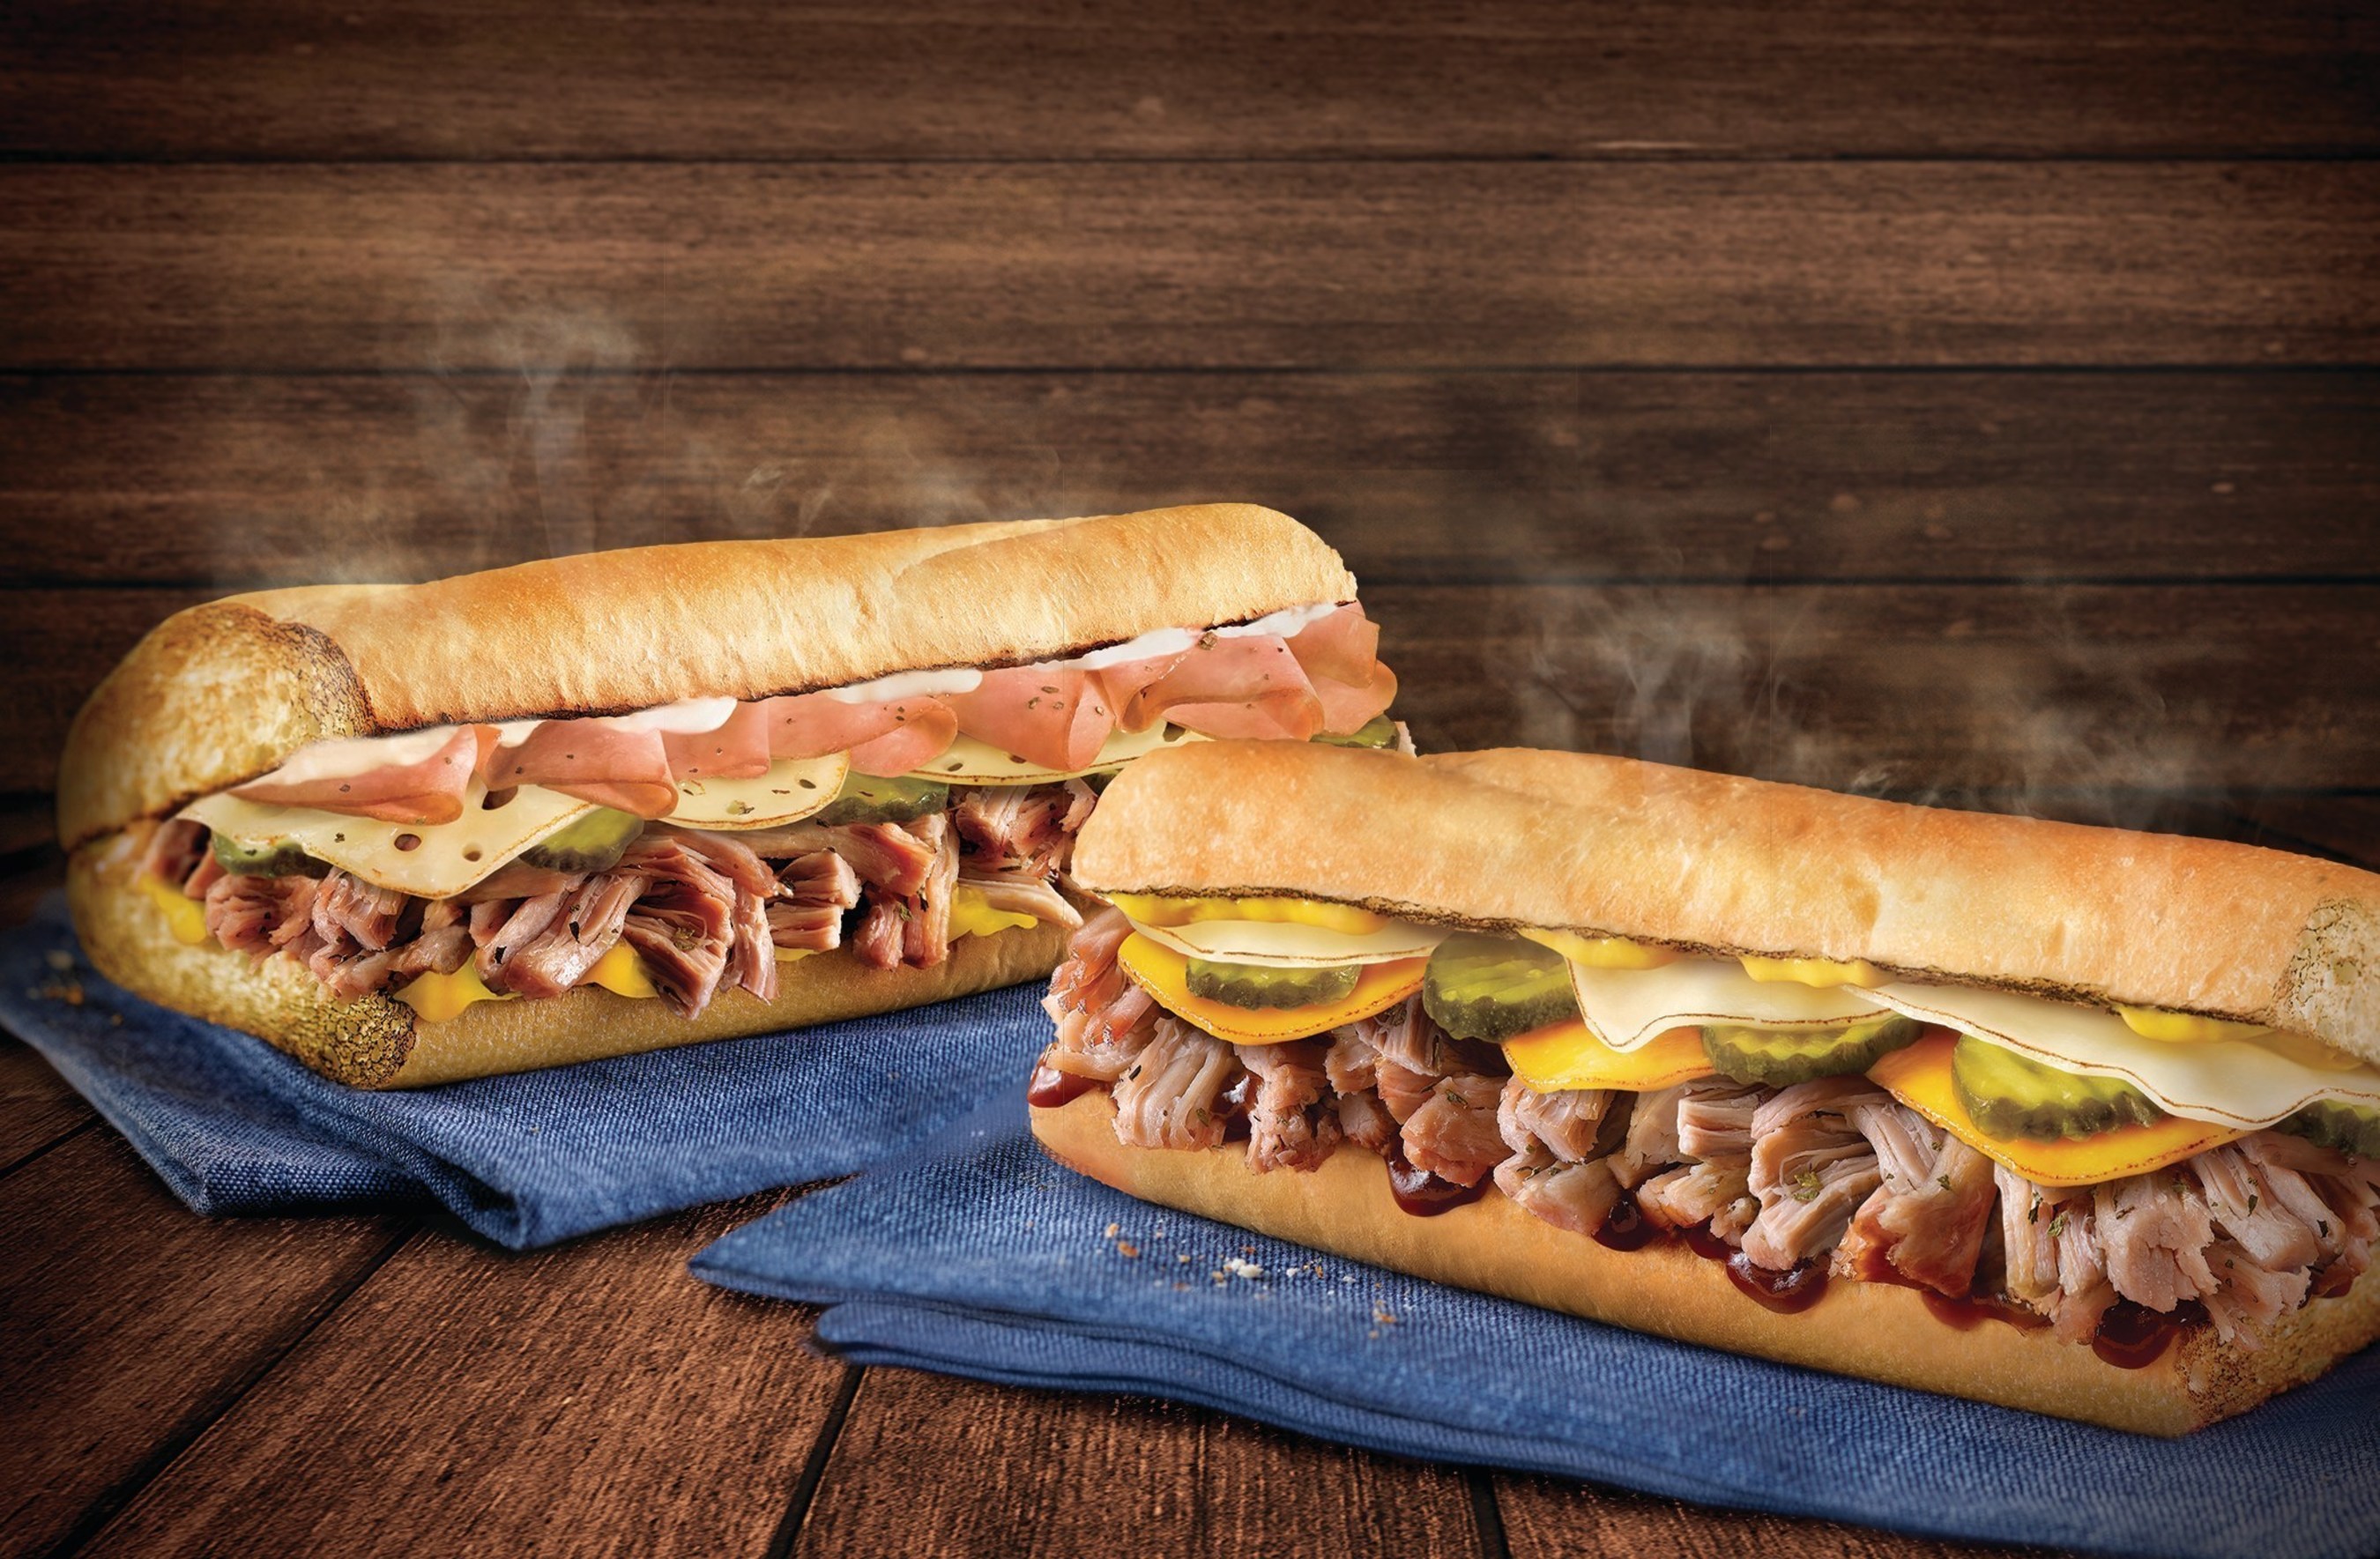 Quiznos is celebrating the start of the summer season by bringing back thesweet smells of barbecue with the Southern BBQ Pulled Pork Sub and QuiznosCuban Sub. Both menu items will be offered for a limited time beginning inJune and will run through the summer months.